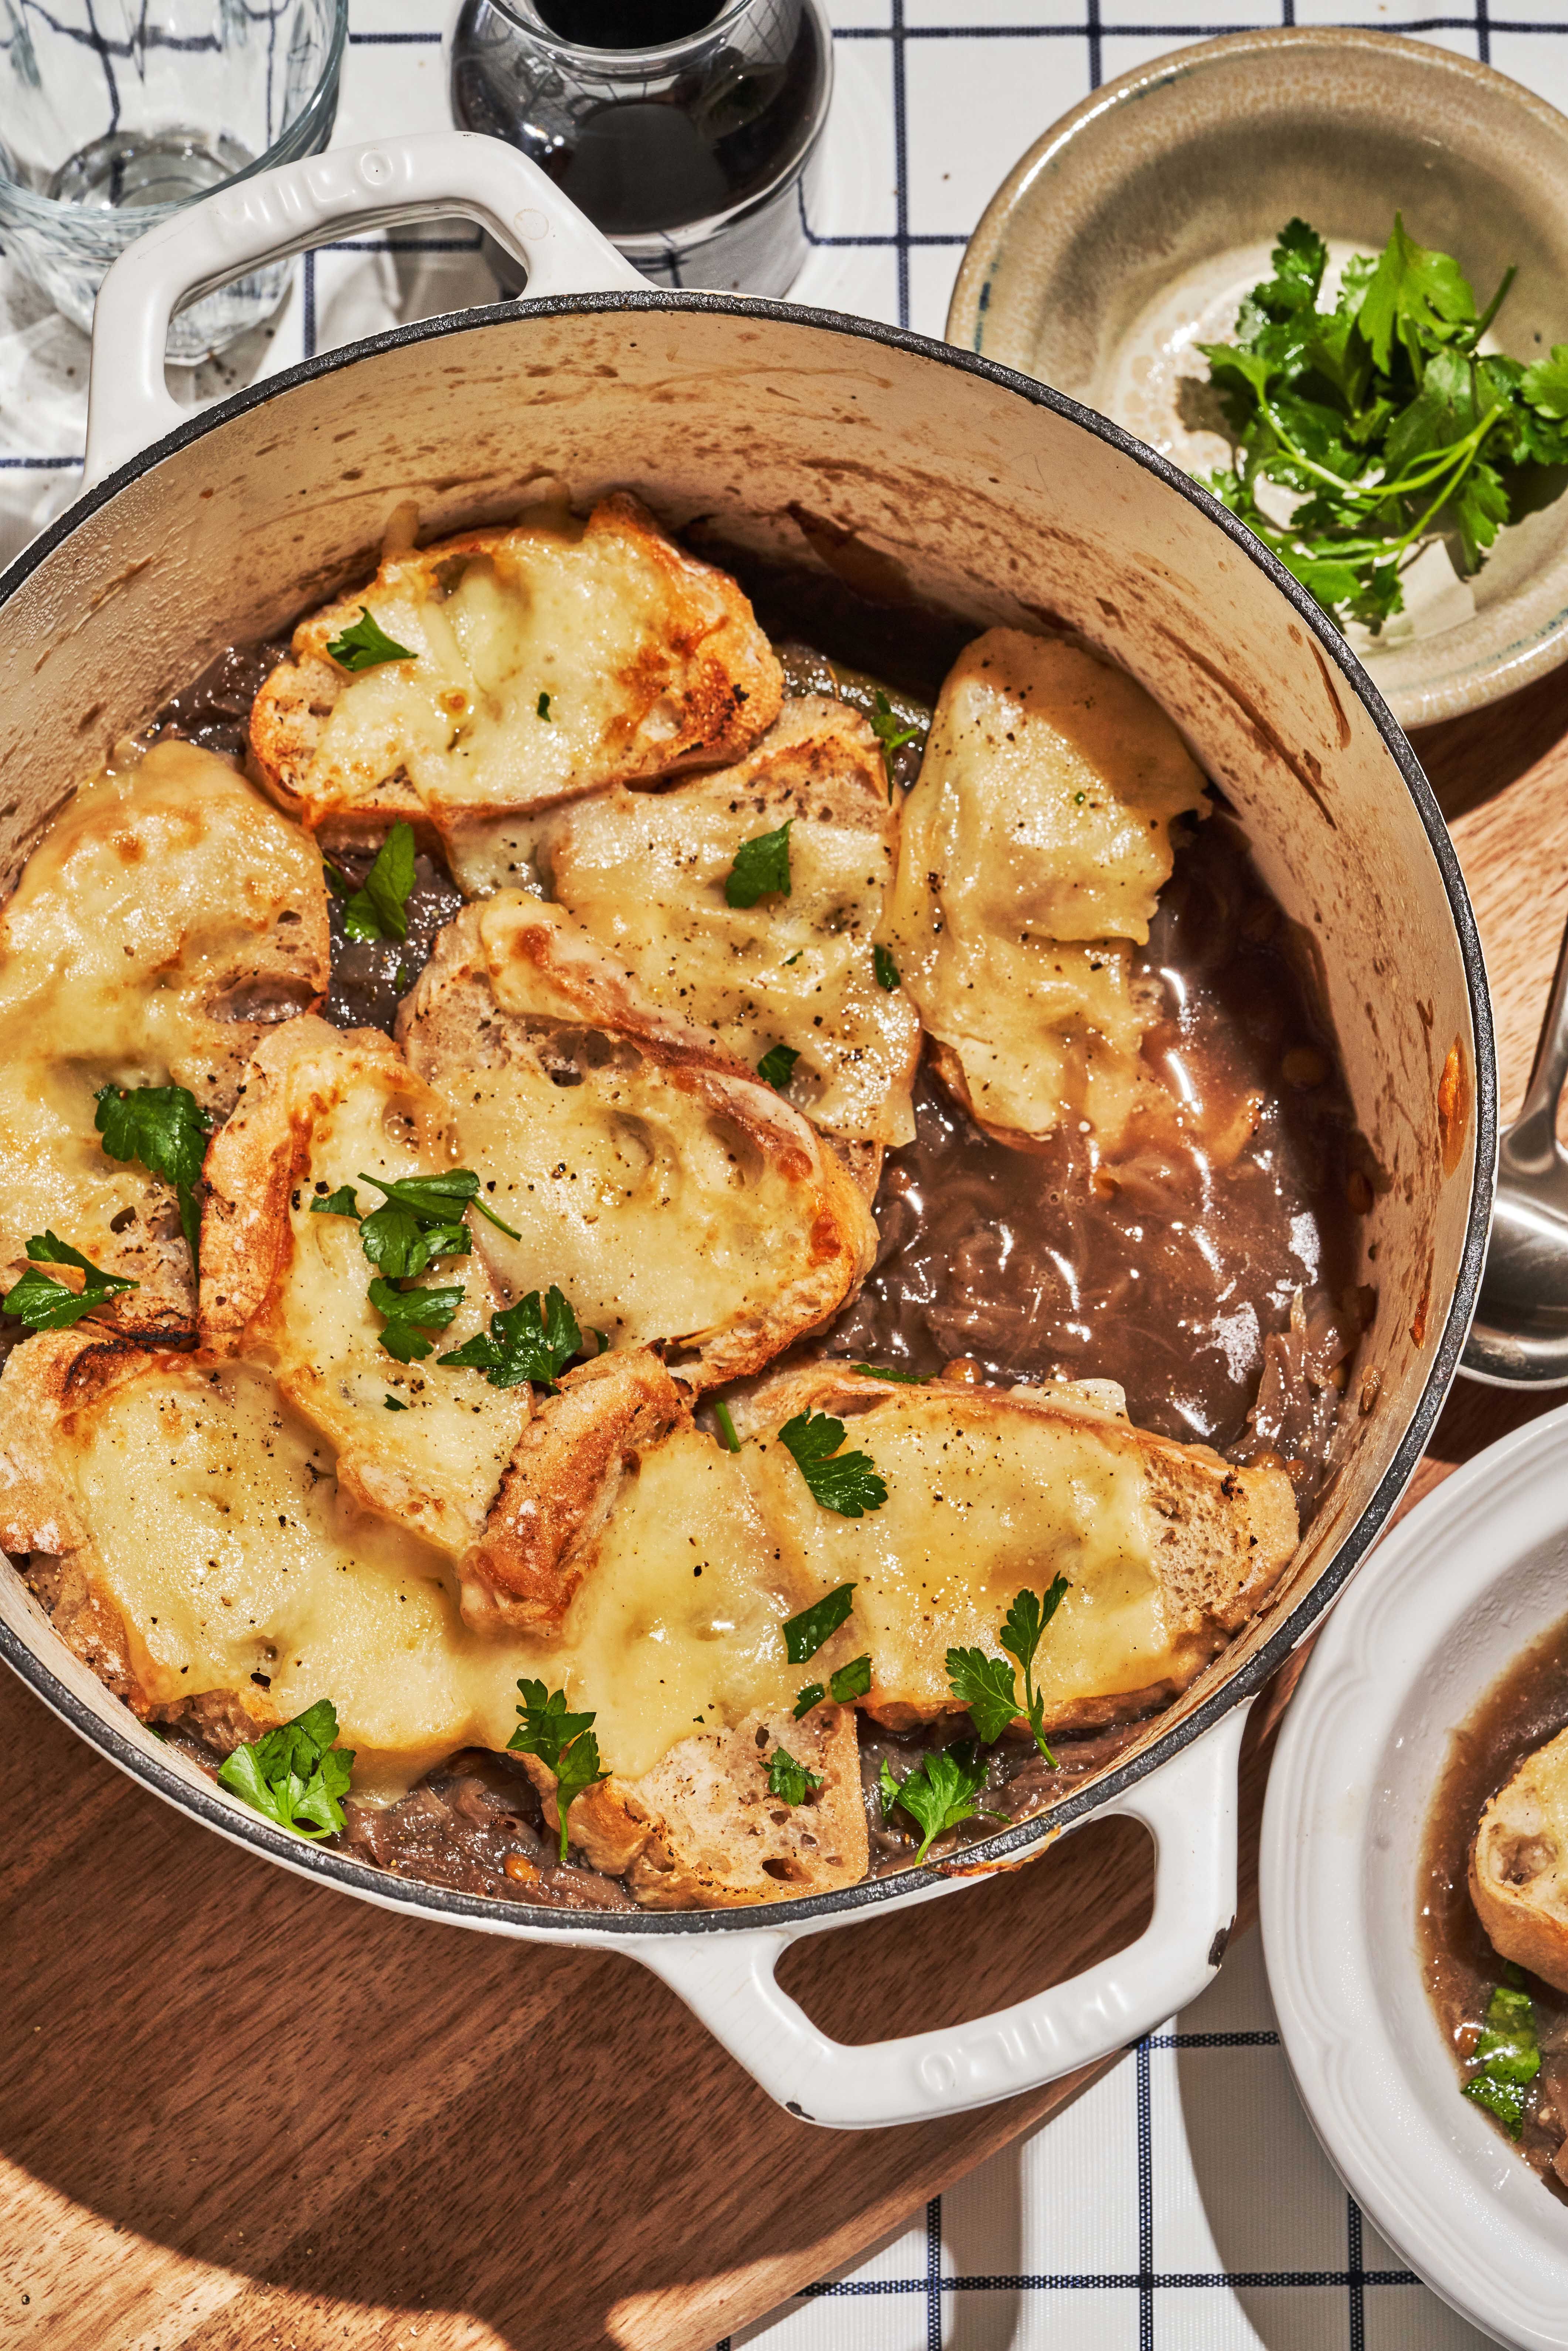 These French Onion Soup Dumplings Are Easy and DELISH - Snackist